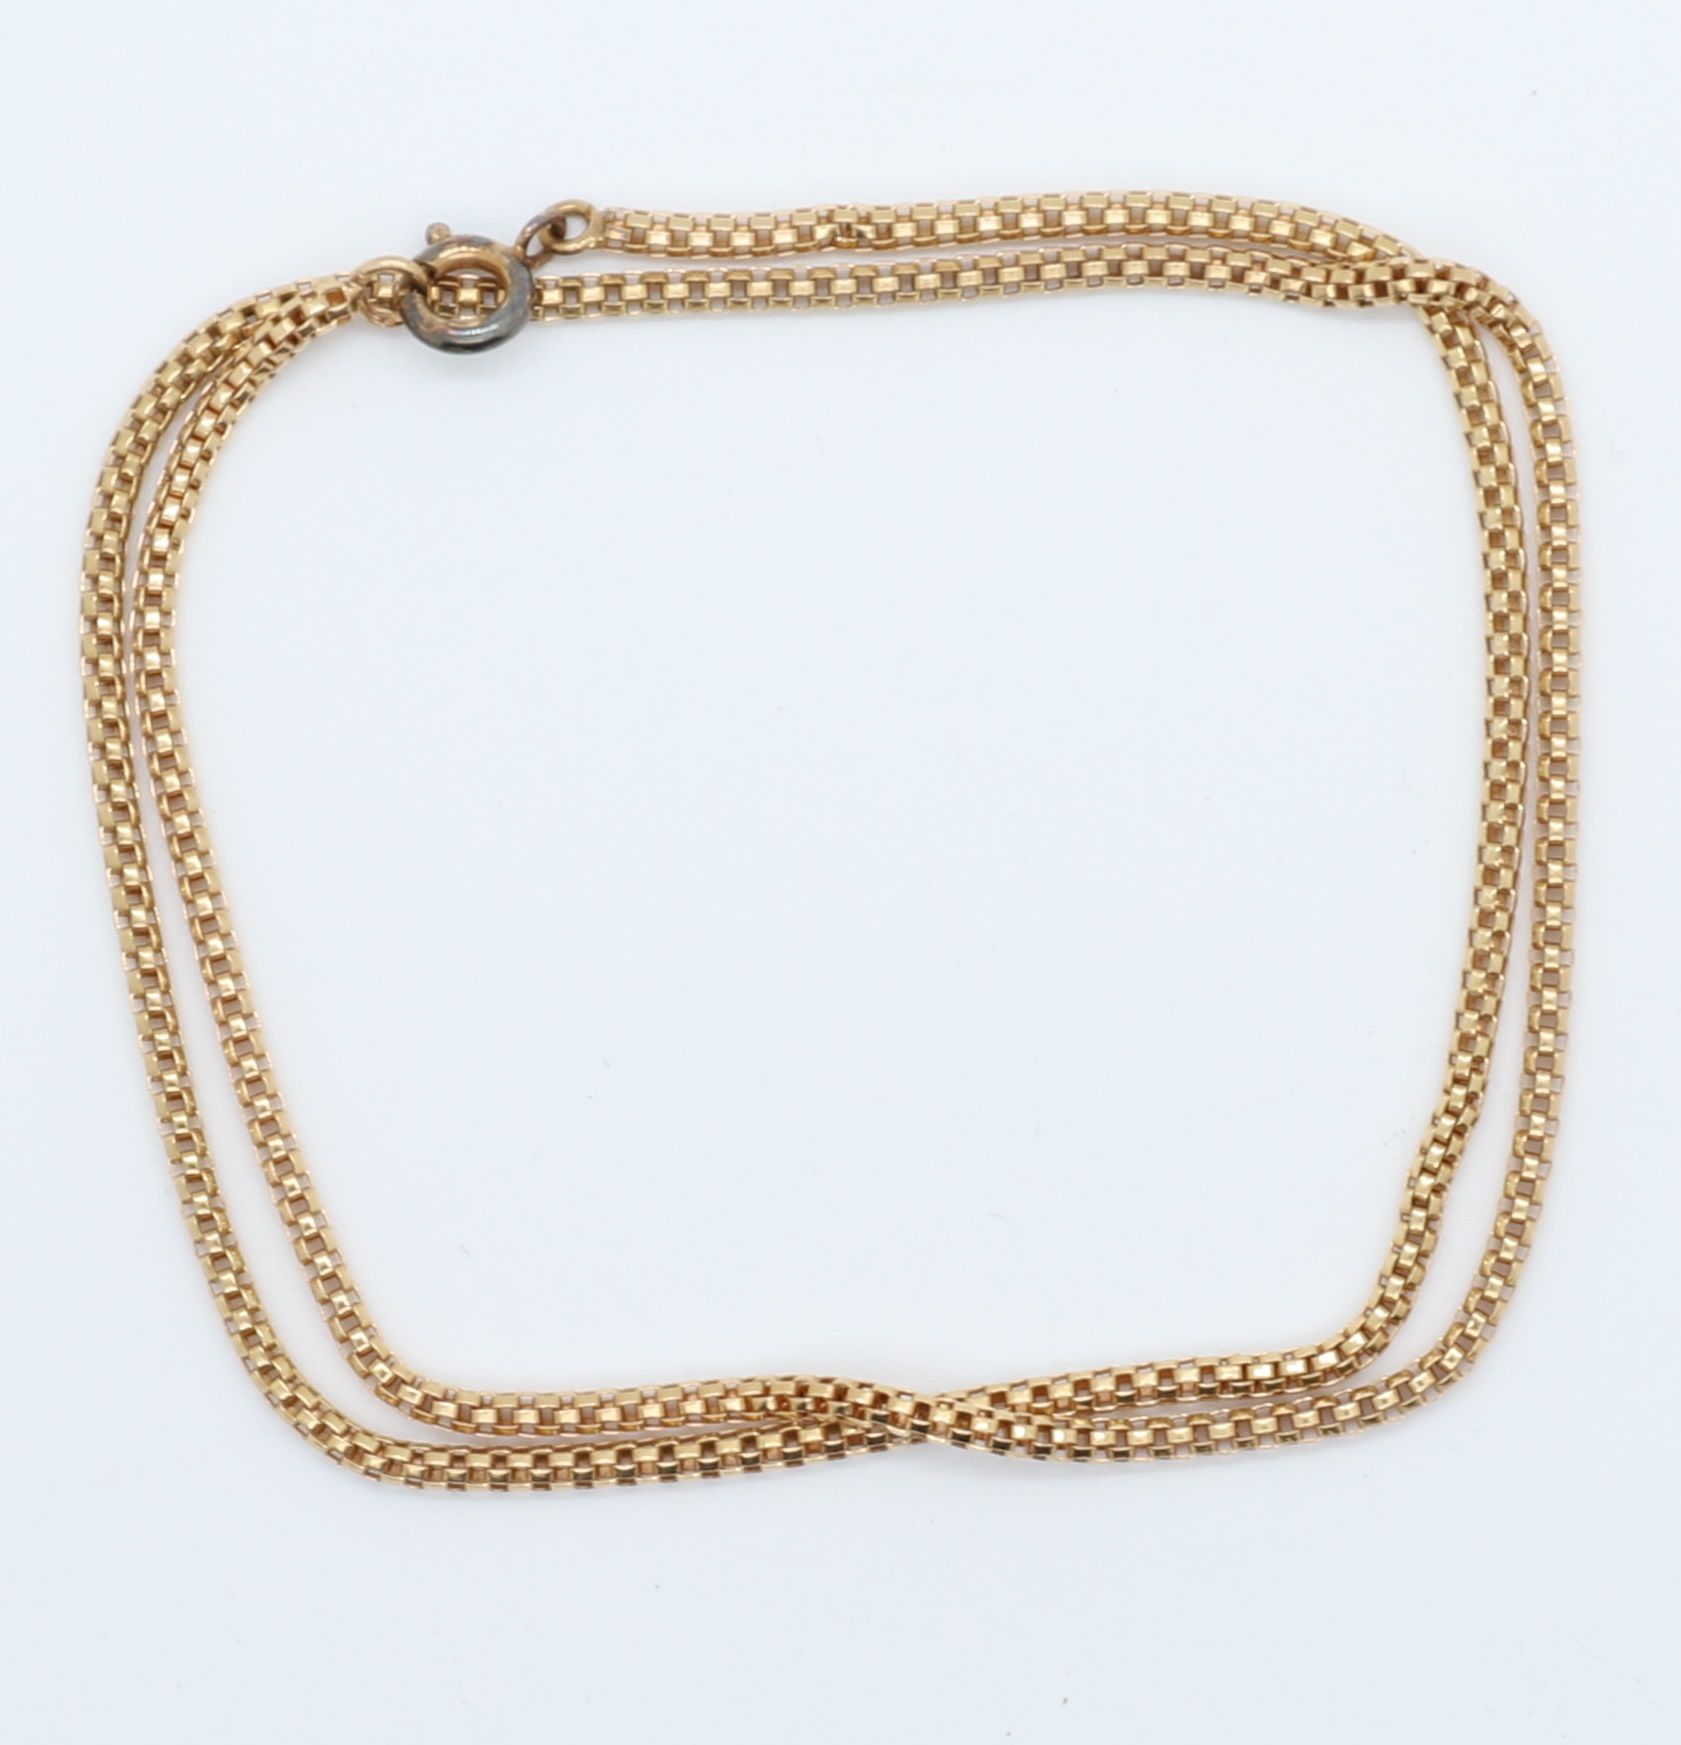 Null CHAIN WITH ROUND LINKS IN YELLOW GOLD
L : 40 cm
Weight : 5,8 grs
Wear on th&hellip;